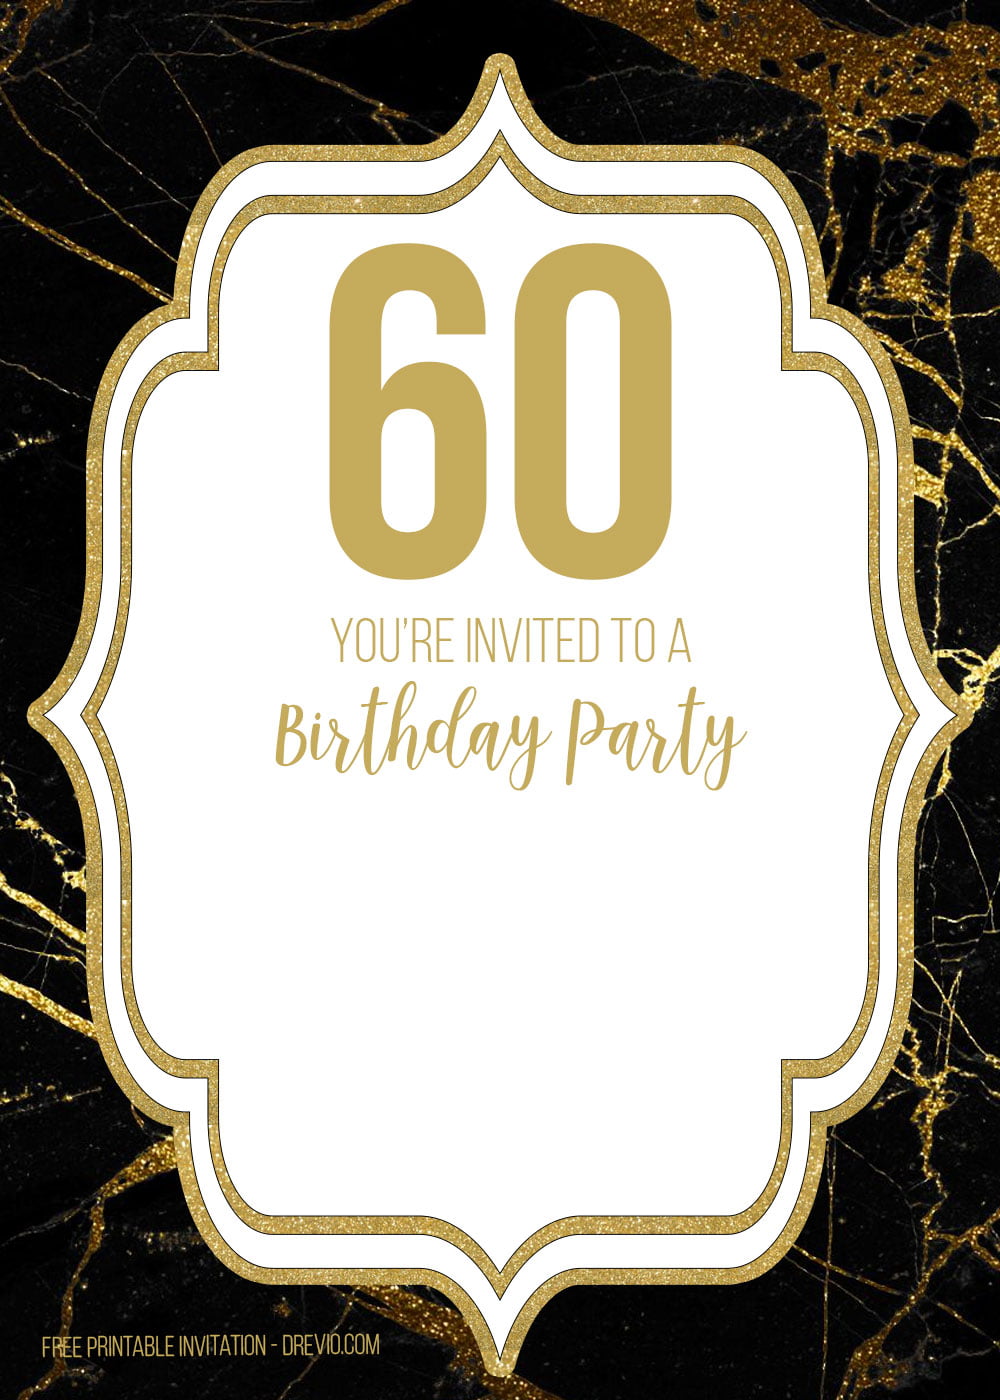 FREE Printable Black and Gold 60th Birthday Invitation Templates Download Hundreds FREE